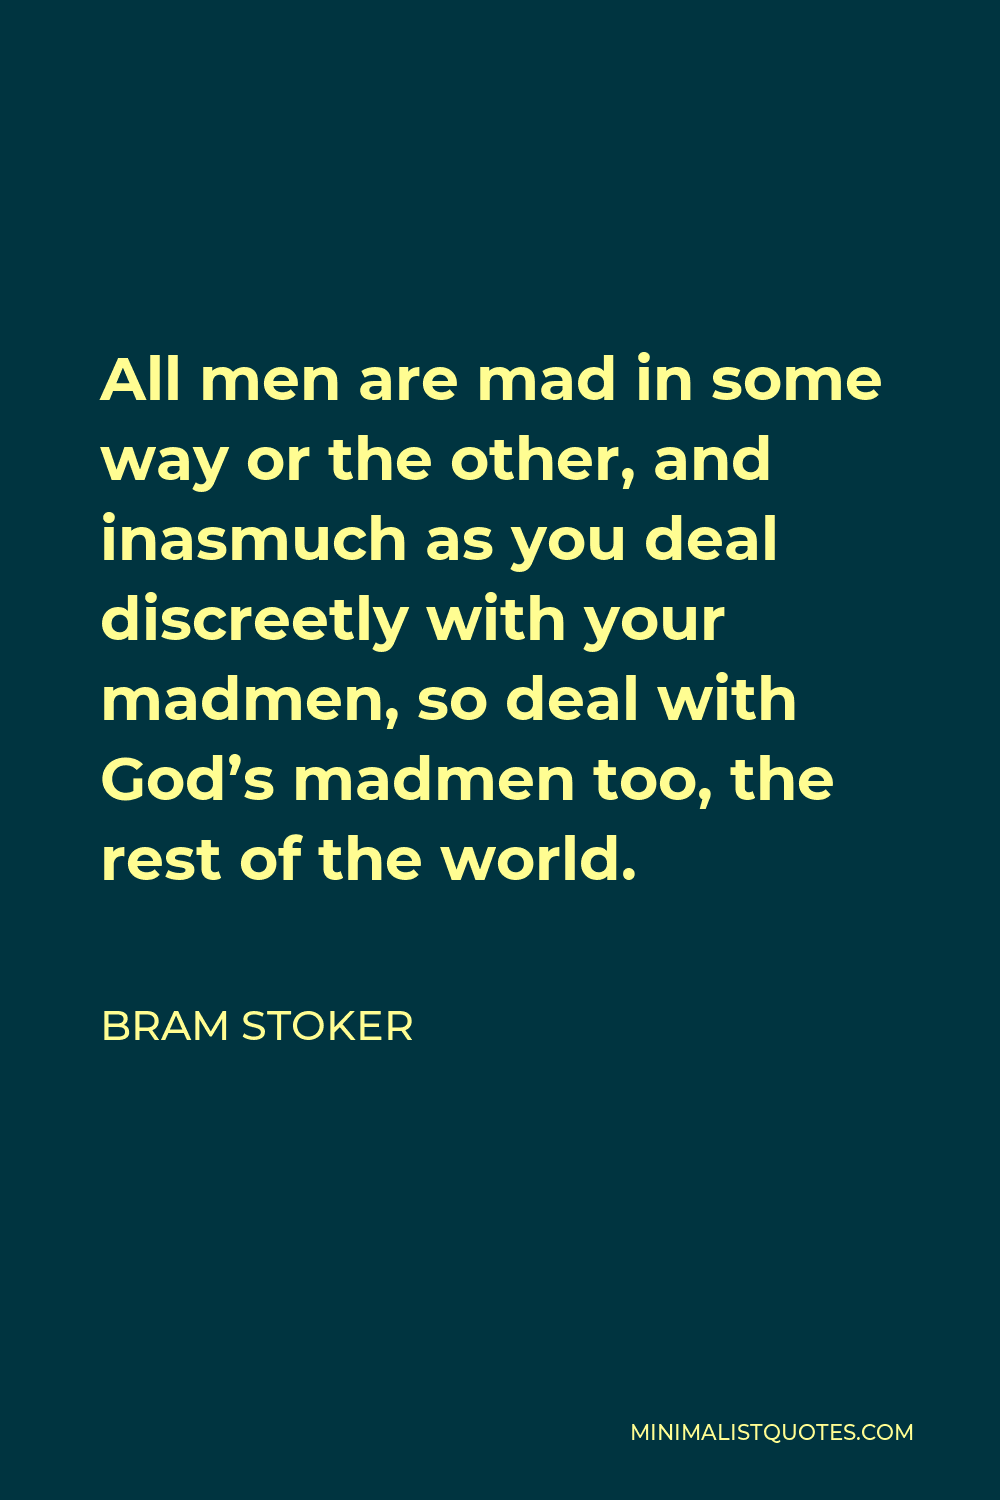 Bram Stoker Quote - All men are mad in some way or the other, and inasmuch as you deal discreetly with your madmen, so deal with God’s madmen too, the rest of the world.